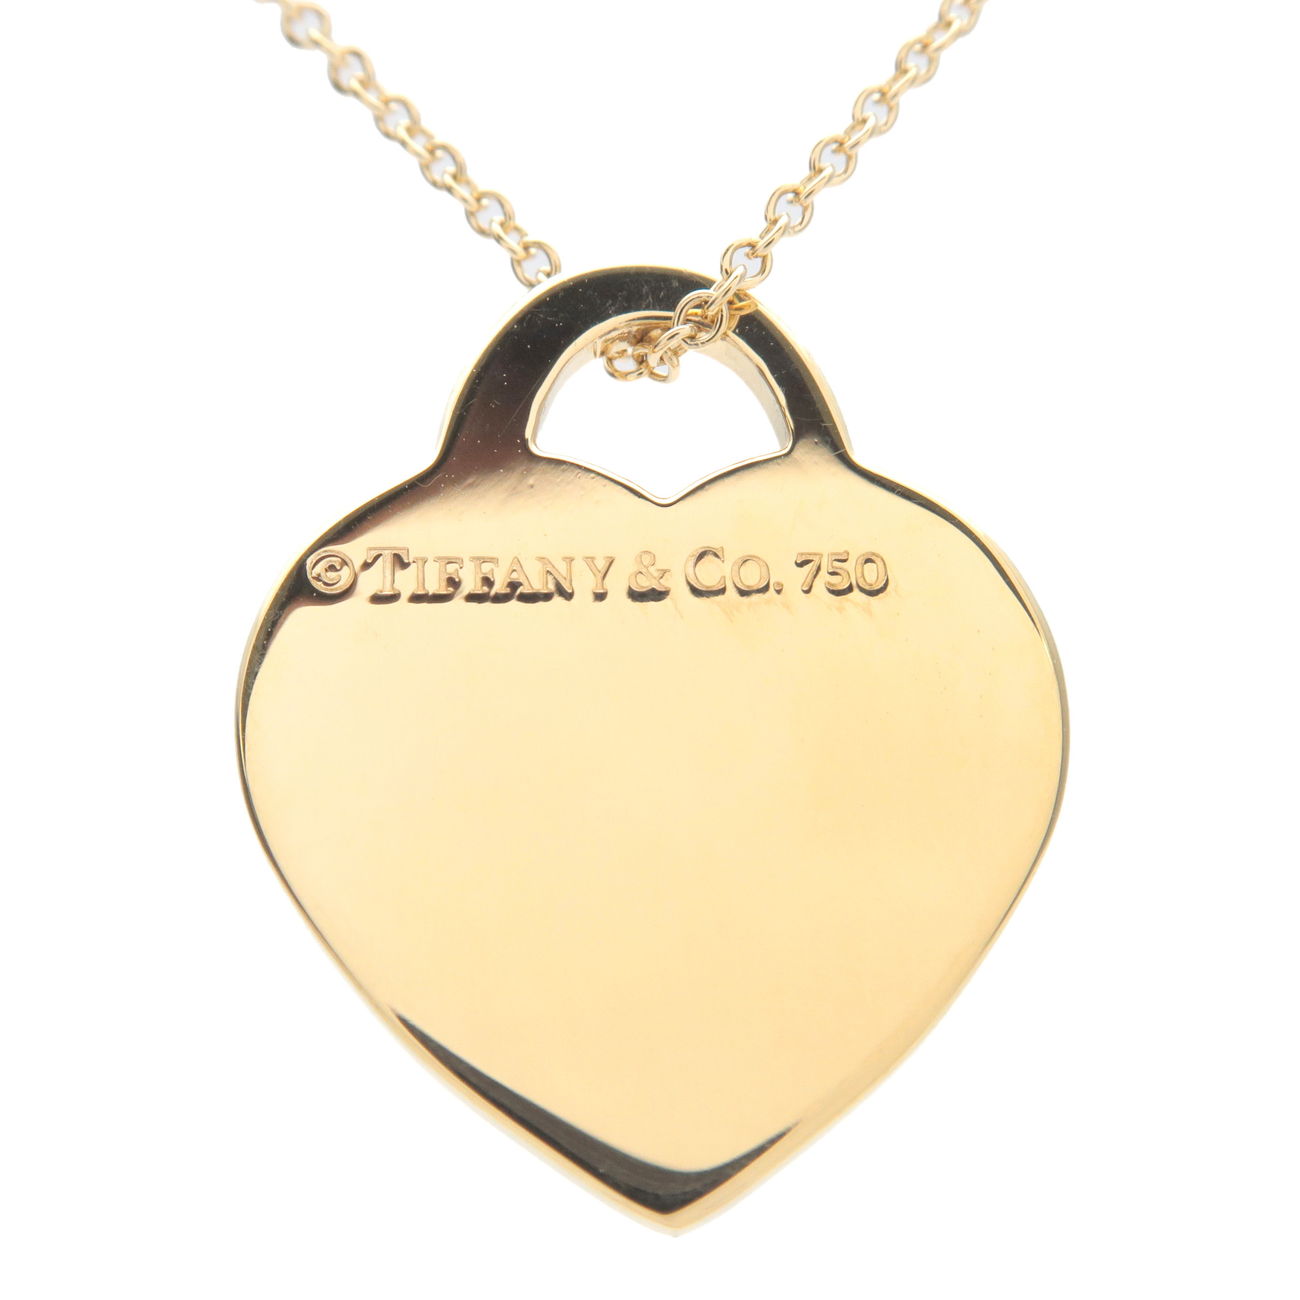 Tiffany-&-Co.-Notes-Heart-Tag-Necklace-K18YG-750-Yellow-Gold